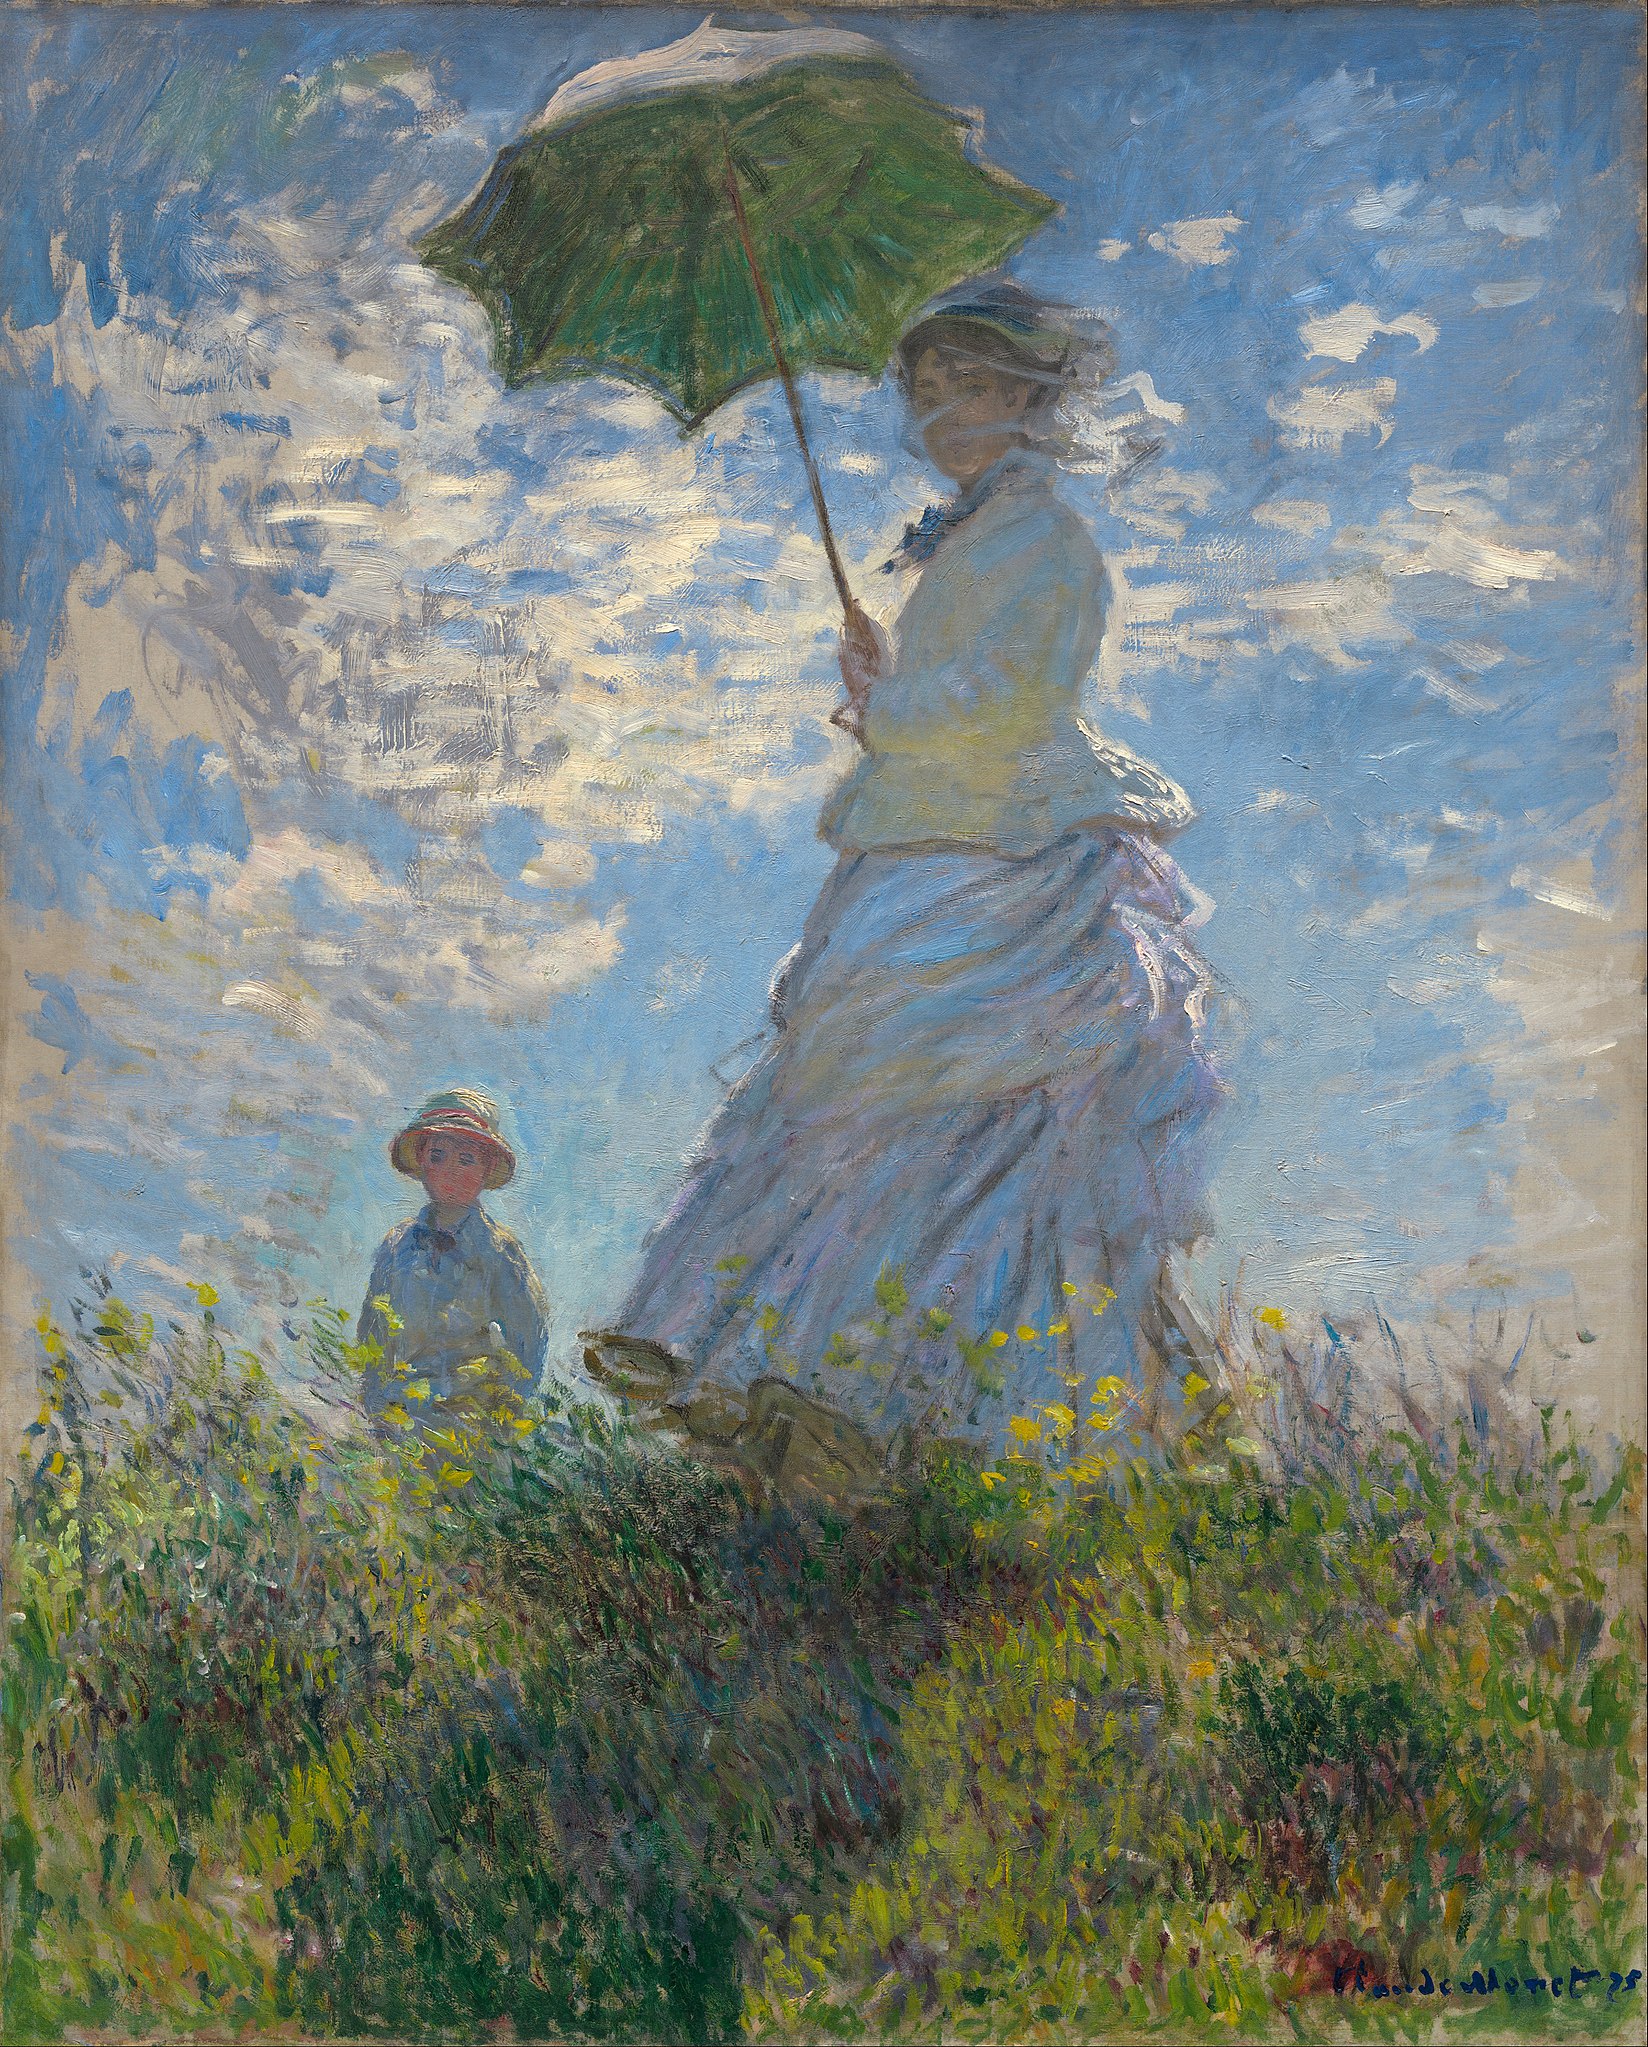 Woman with a Parasol by Claude Monet - 1875 - 100 × 81 cm National Gallery of Art